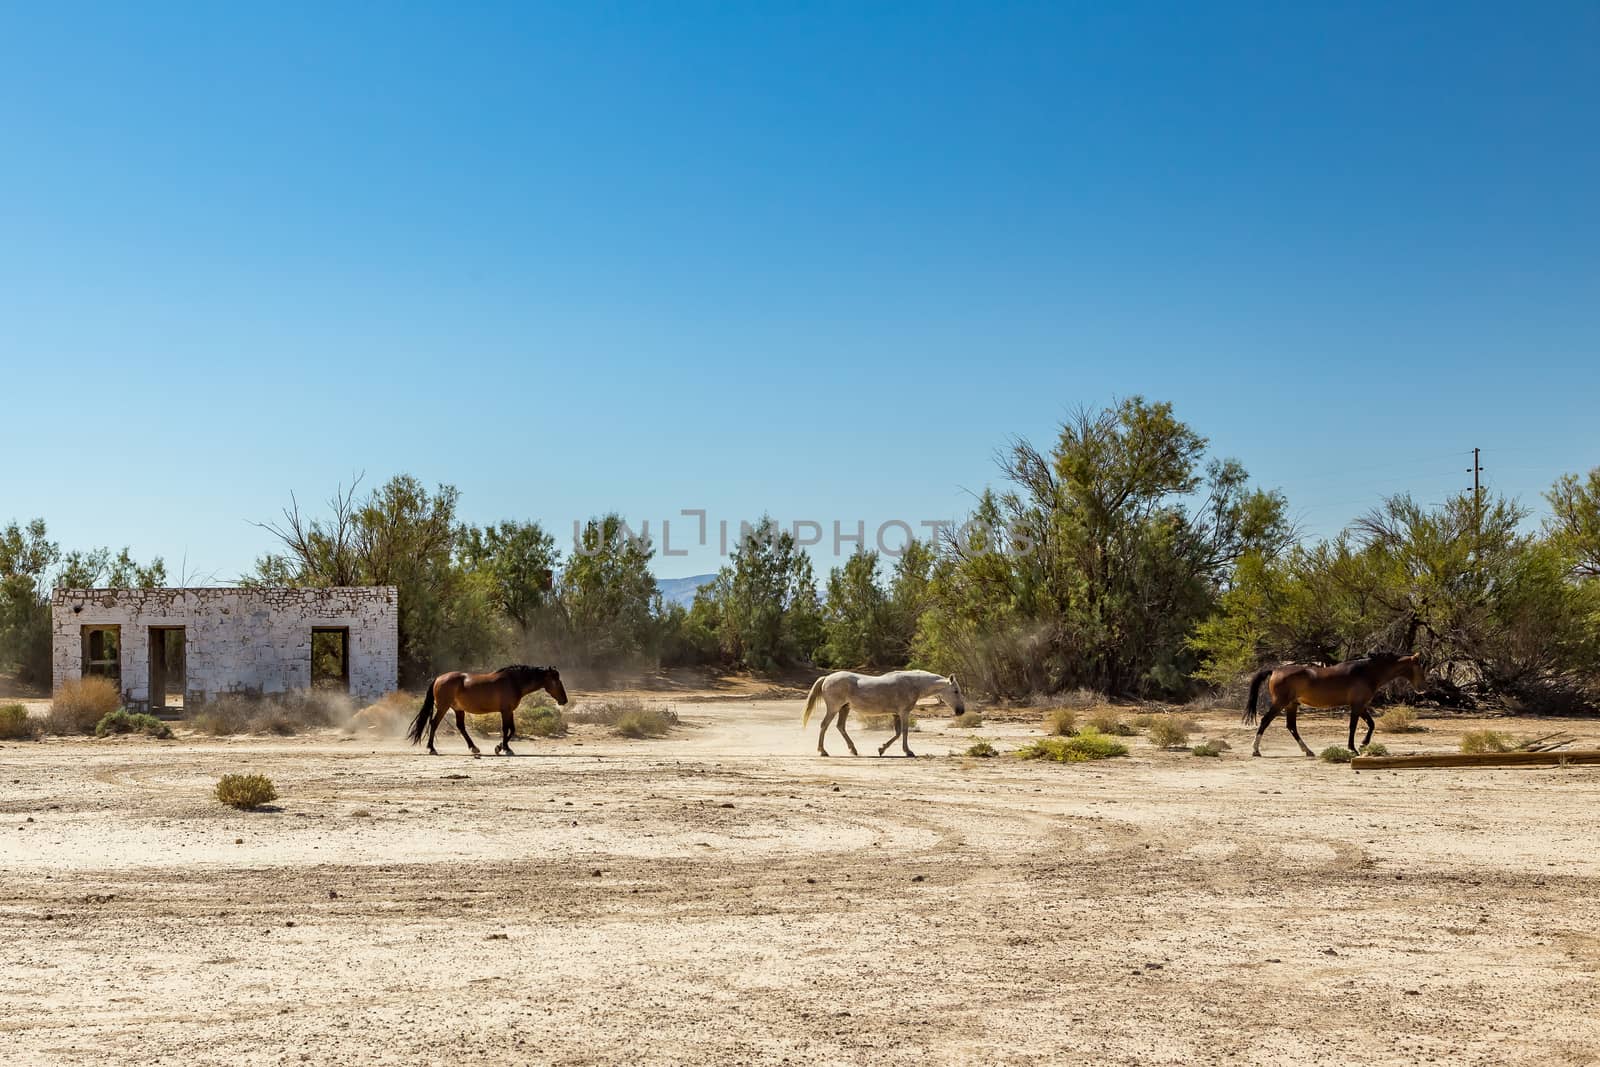 Wild horses walk past an abandoned building that sits alongside the roadway near Death Valley Junction in the Funeral Mountains Wilderness Area, California.